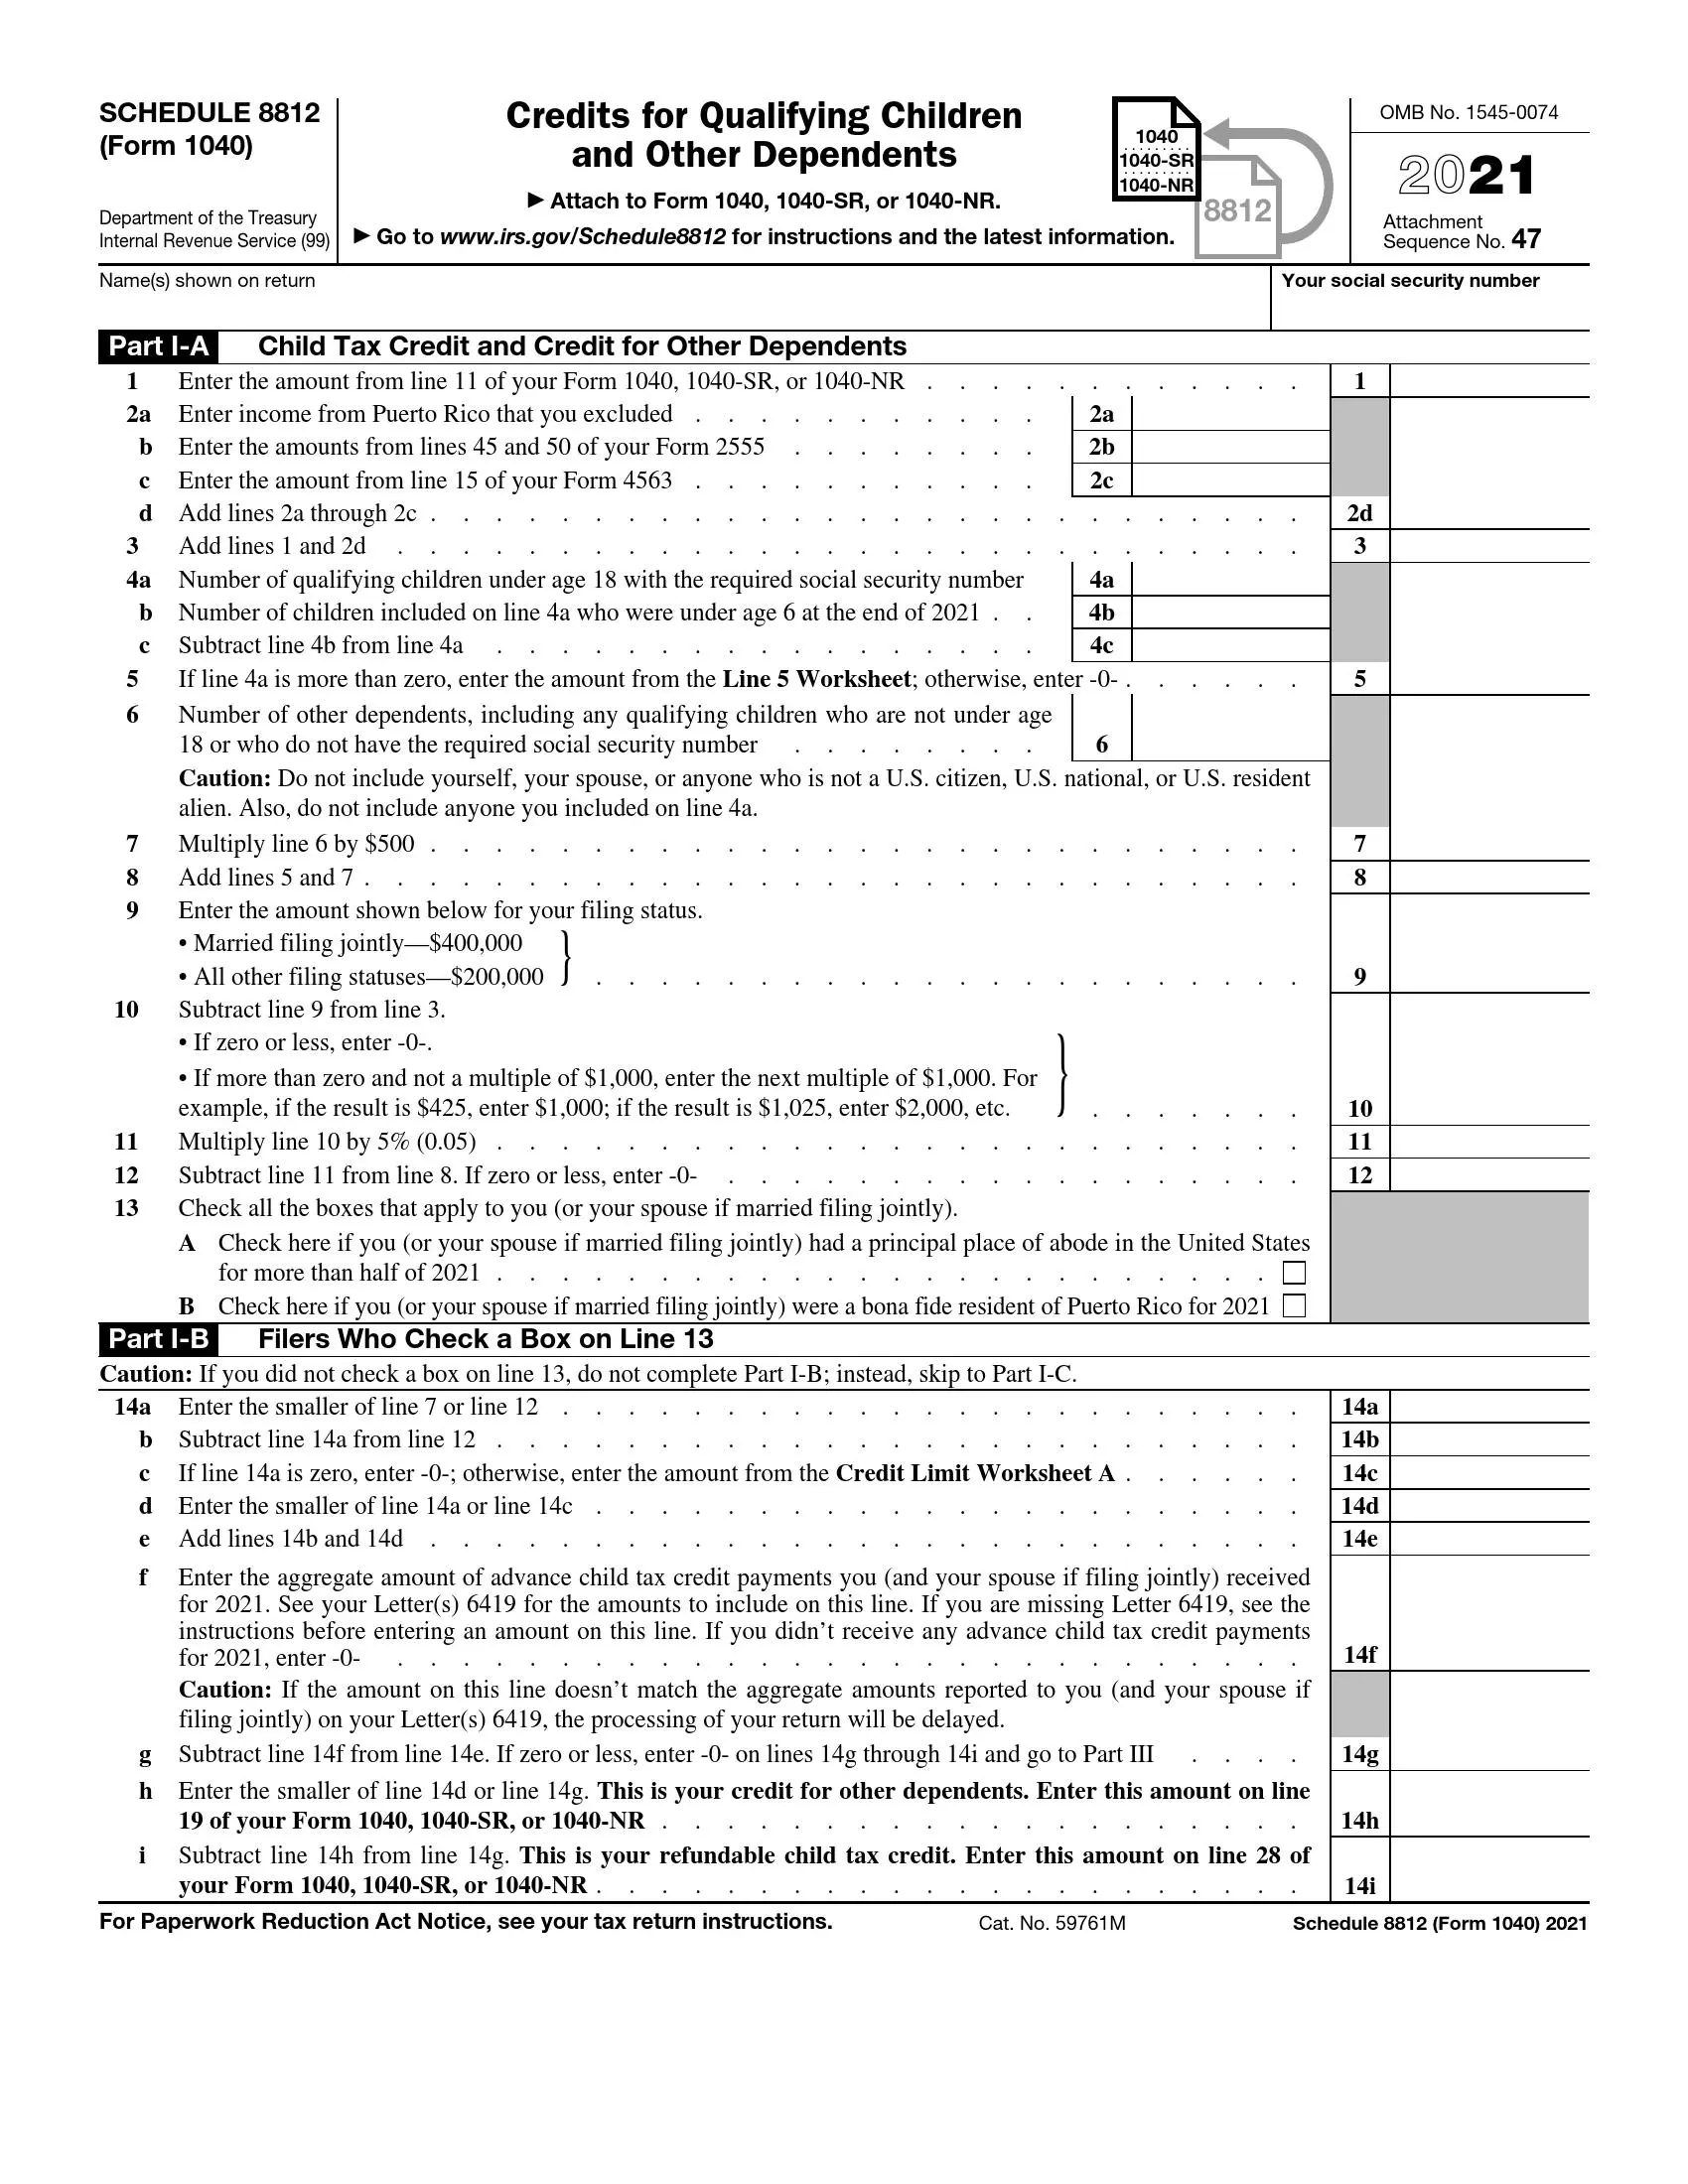 irs schedule 8812 form 1040 2021 preview